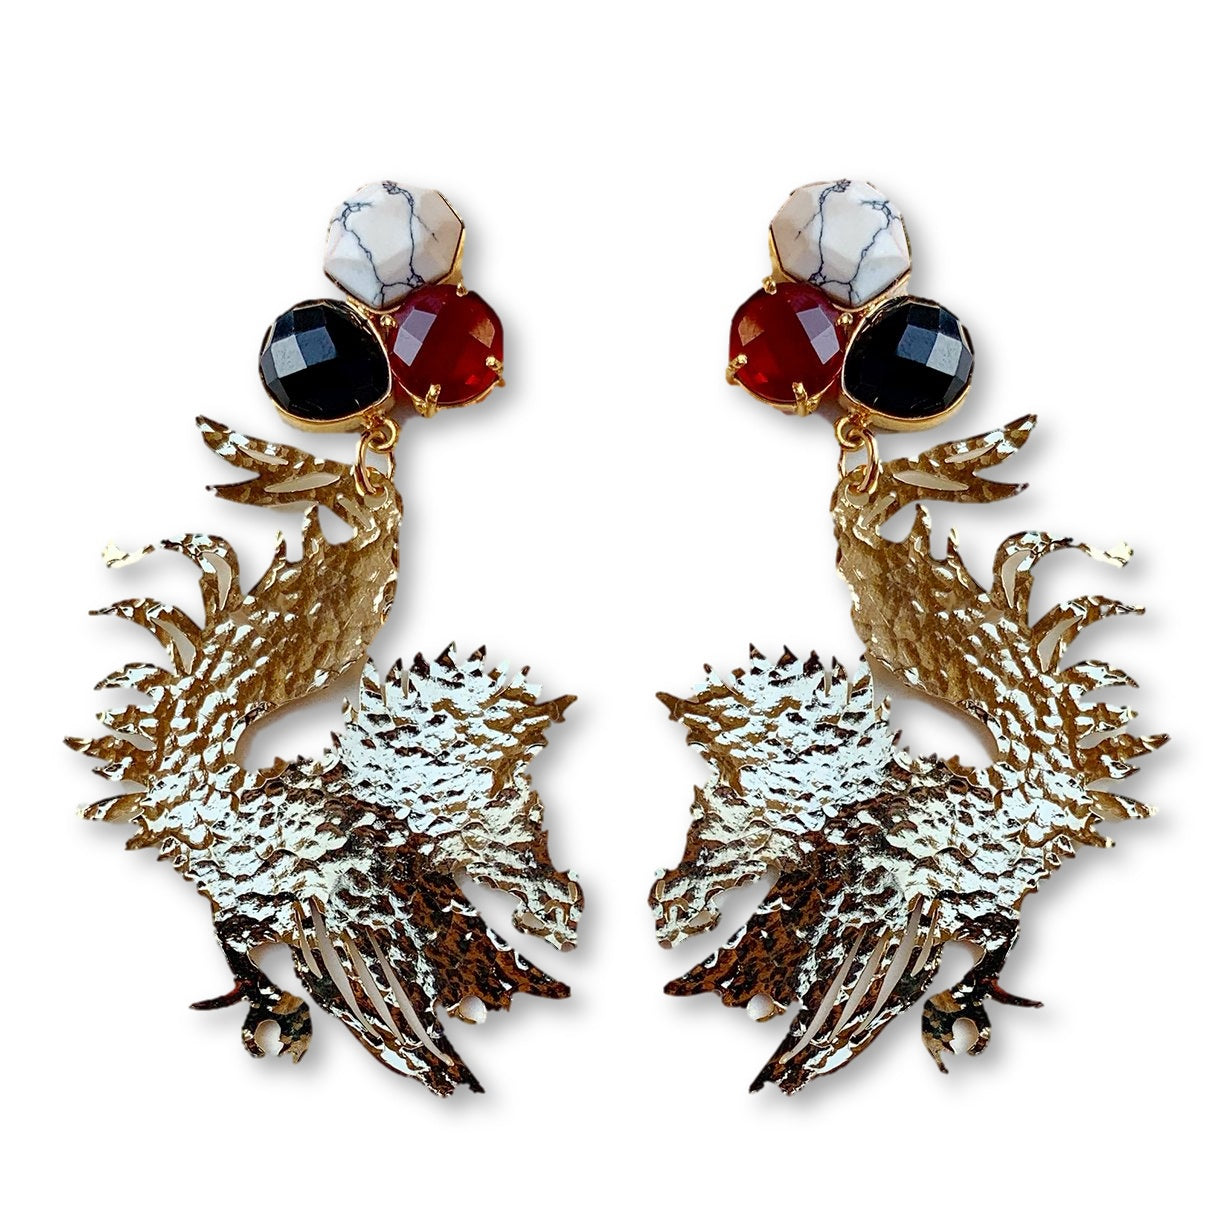 South Carolina Gold Gamecock Earrings with 3 Gemstones